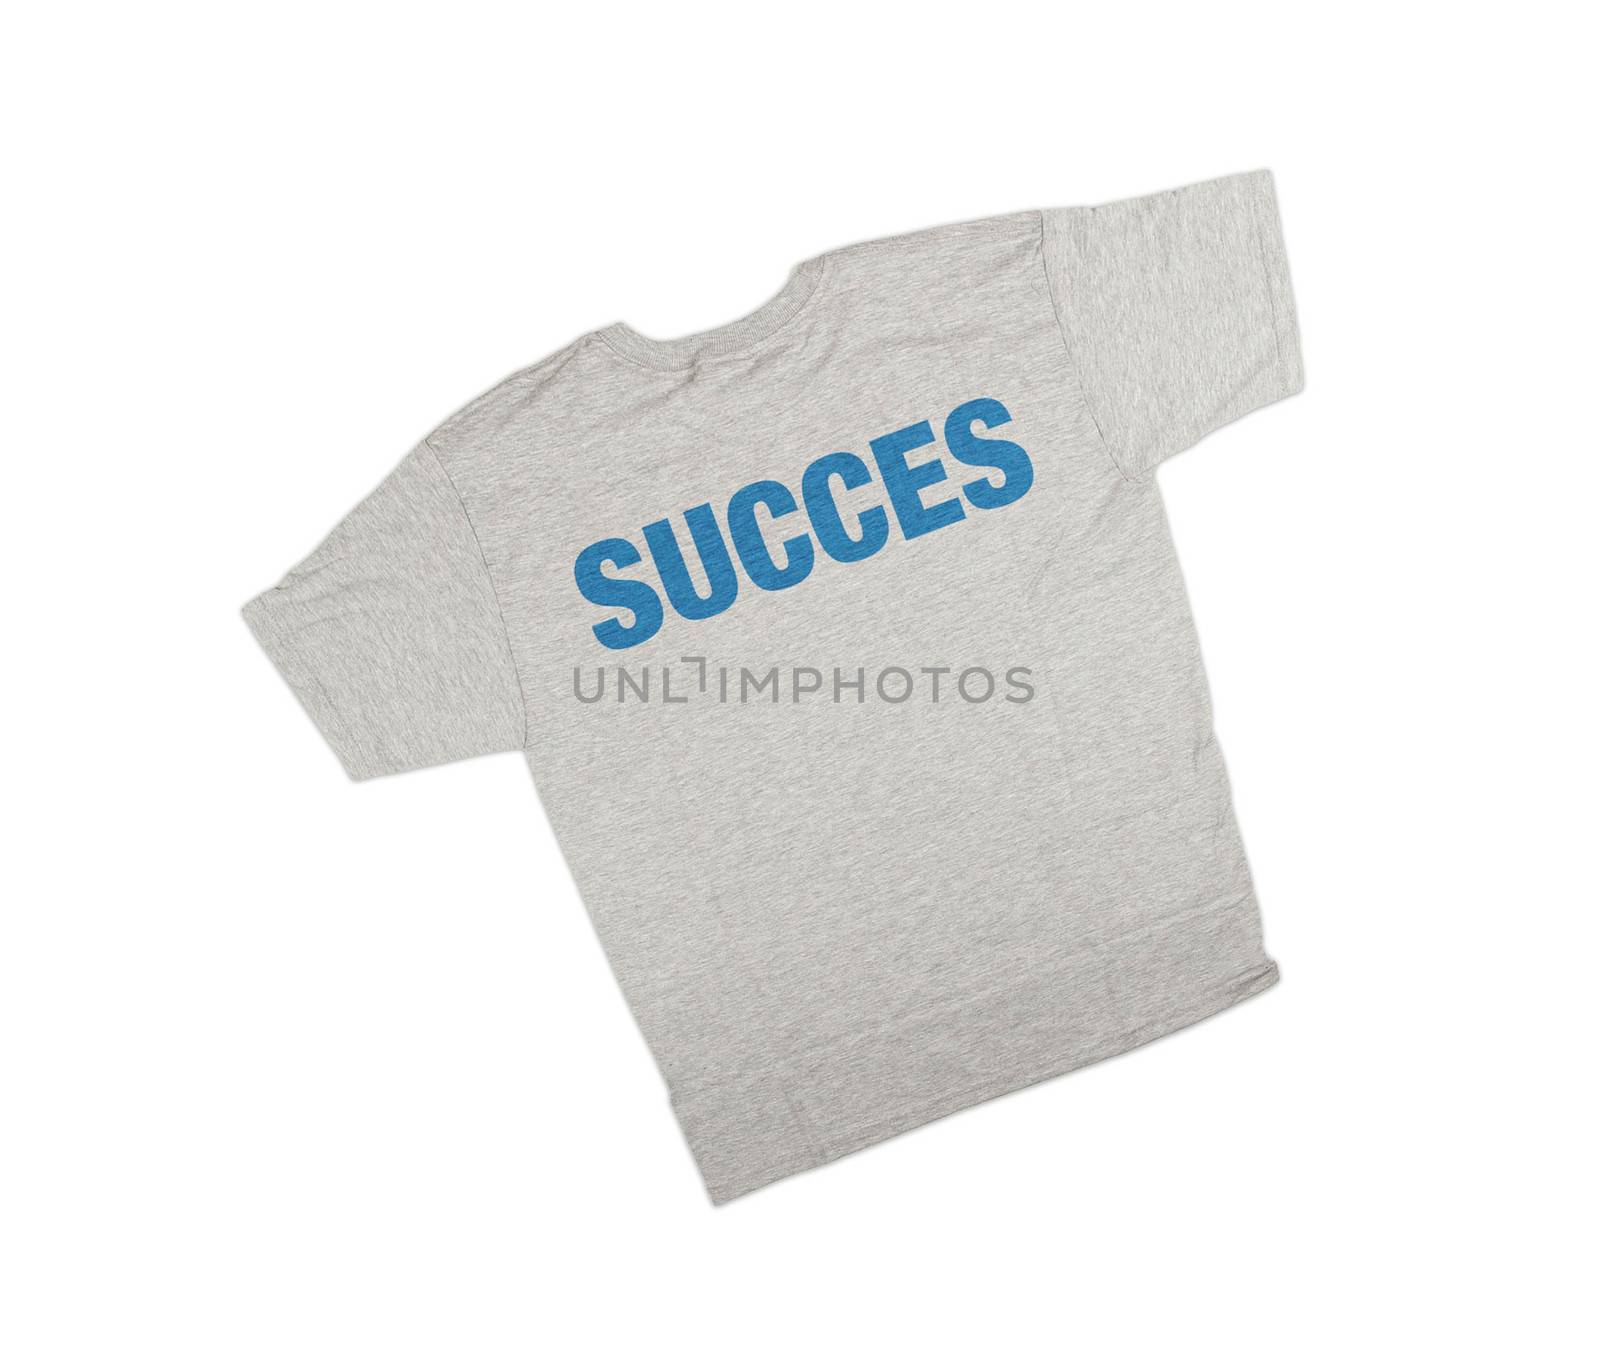 succes  t-shirt isolated on white